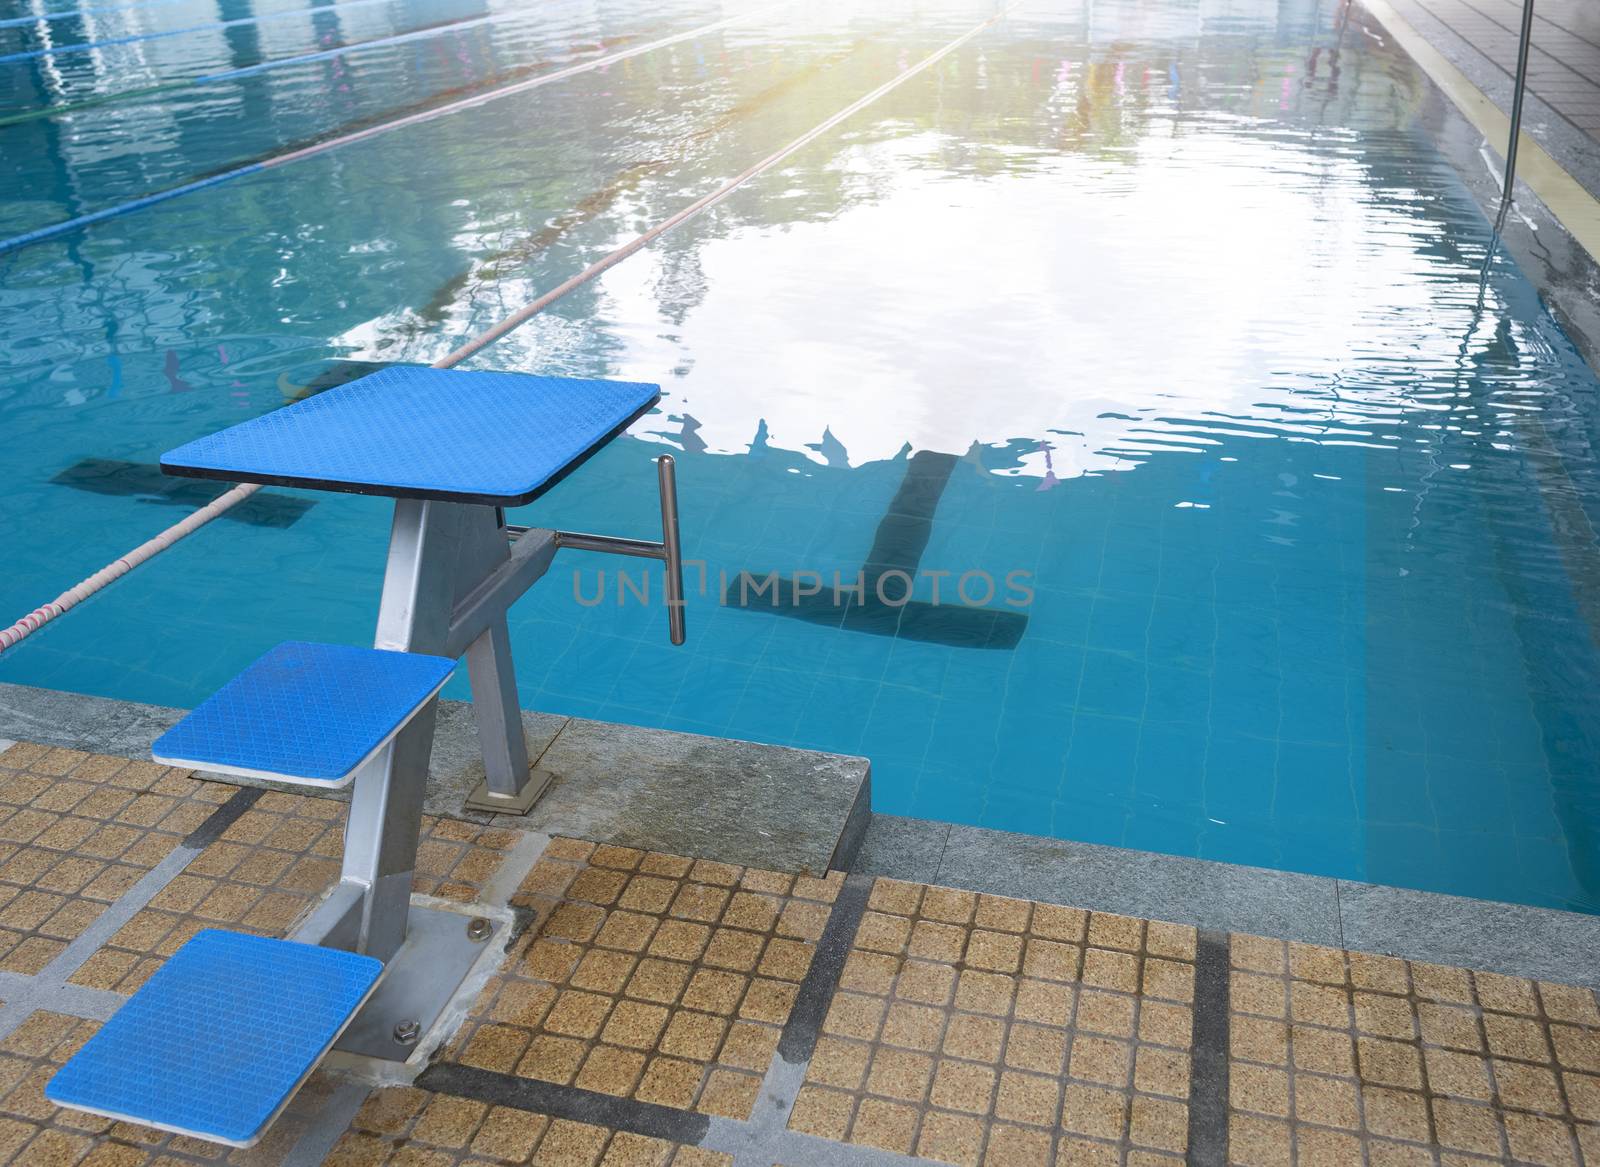 Swimming pool with marked lanes and quiet standing water. Water . With copy space for text or design